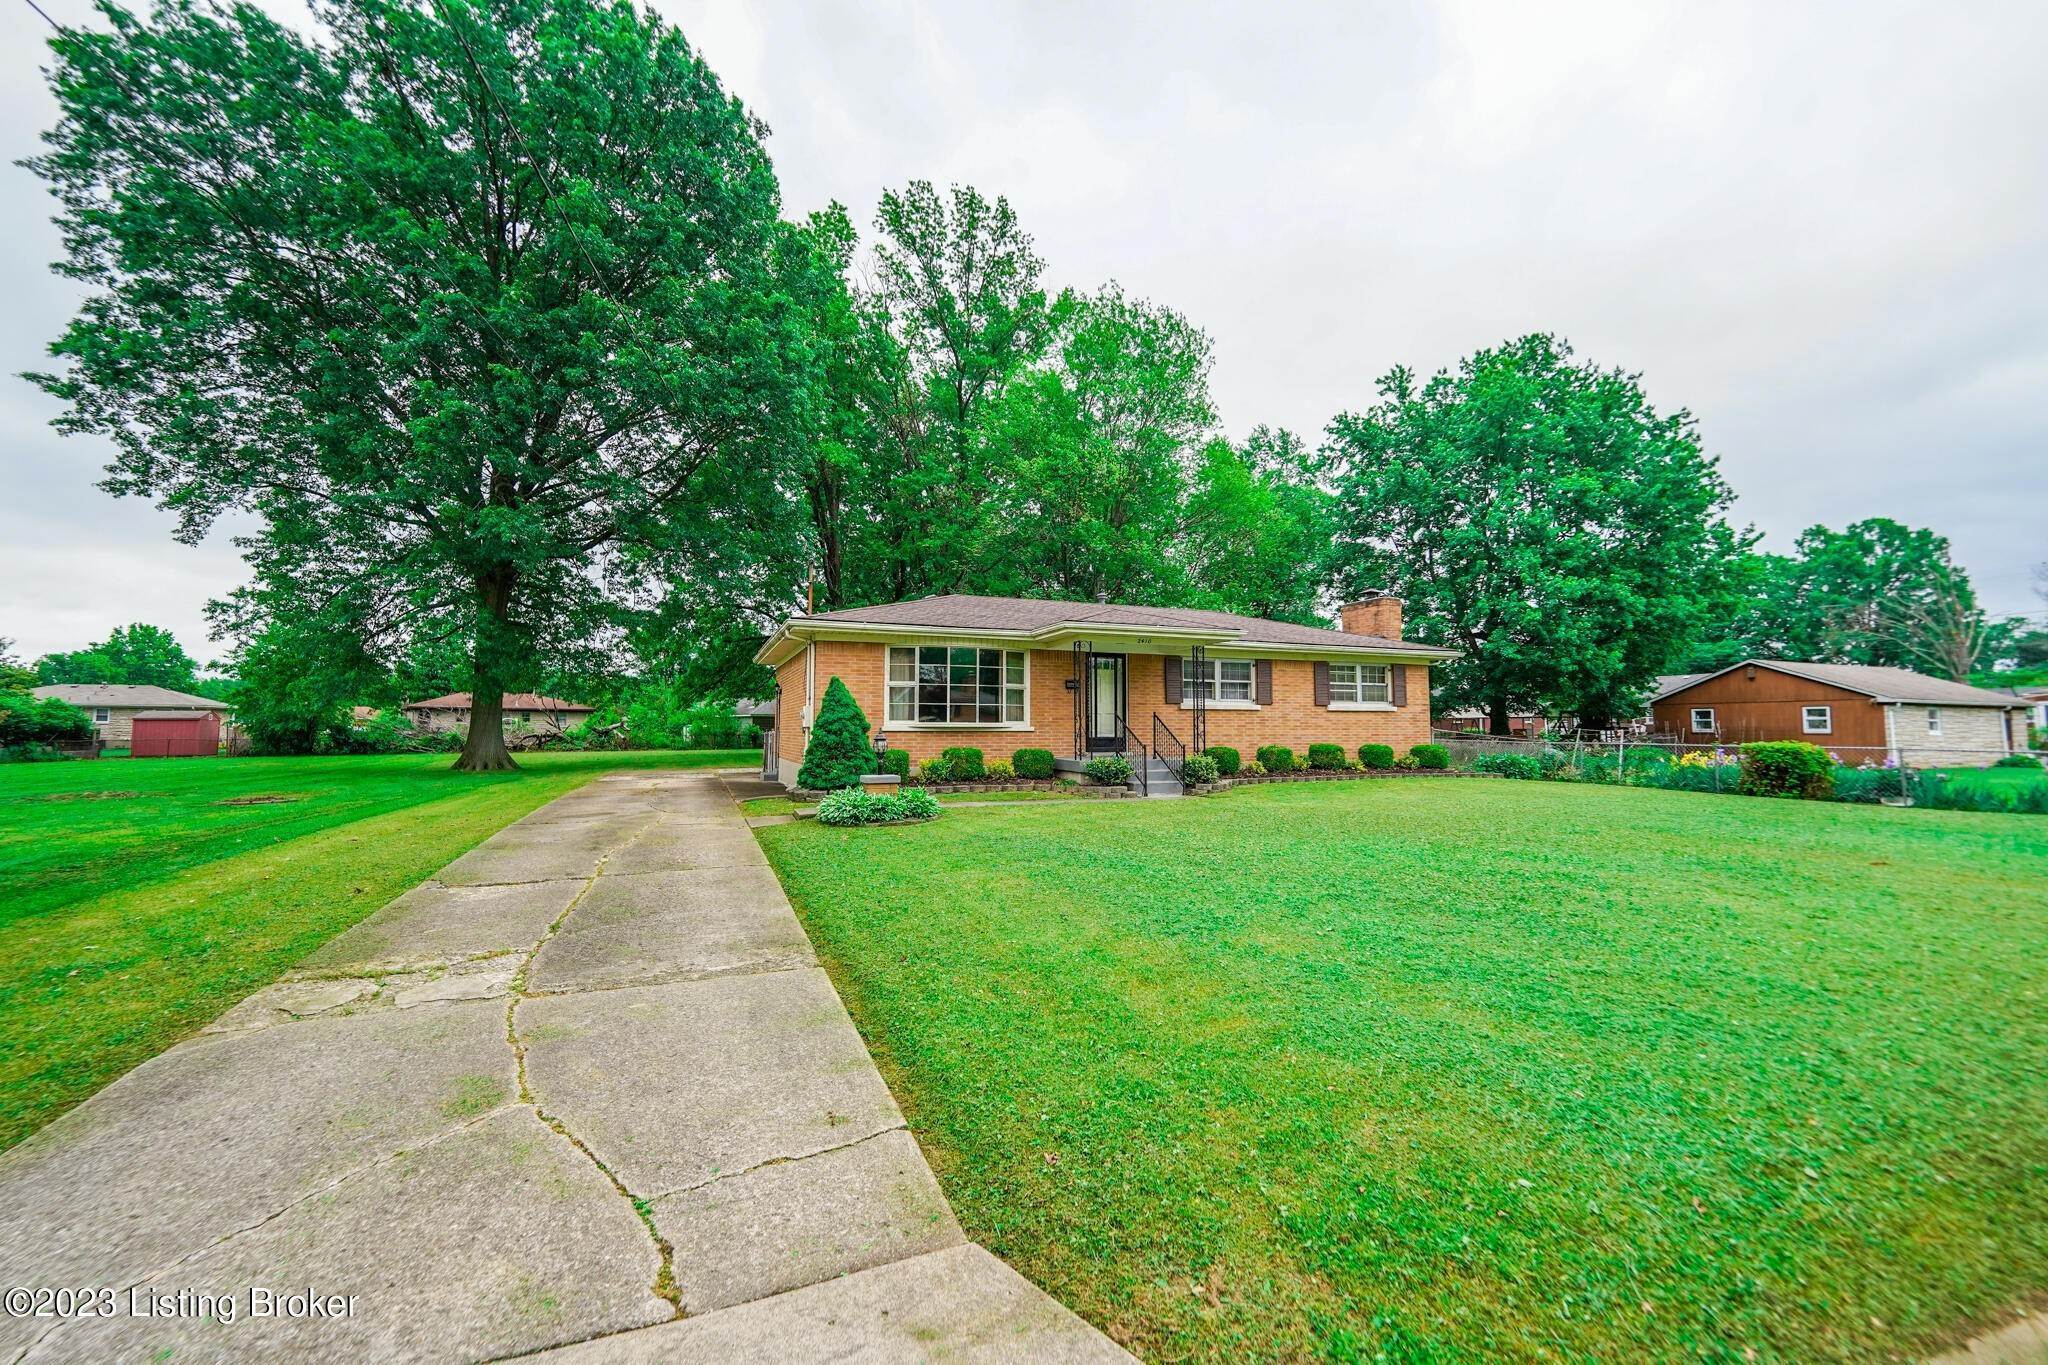 17. Single Family at Louisville, KY 40216